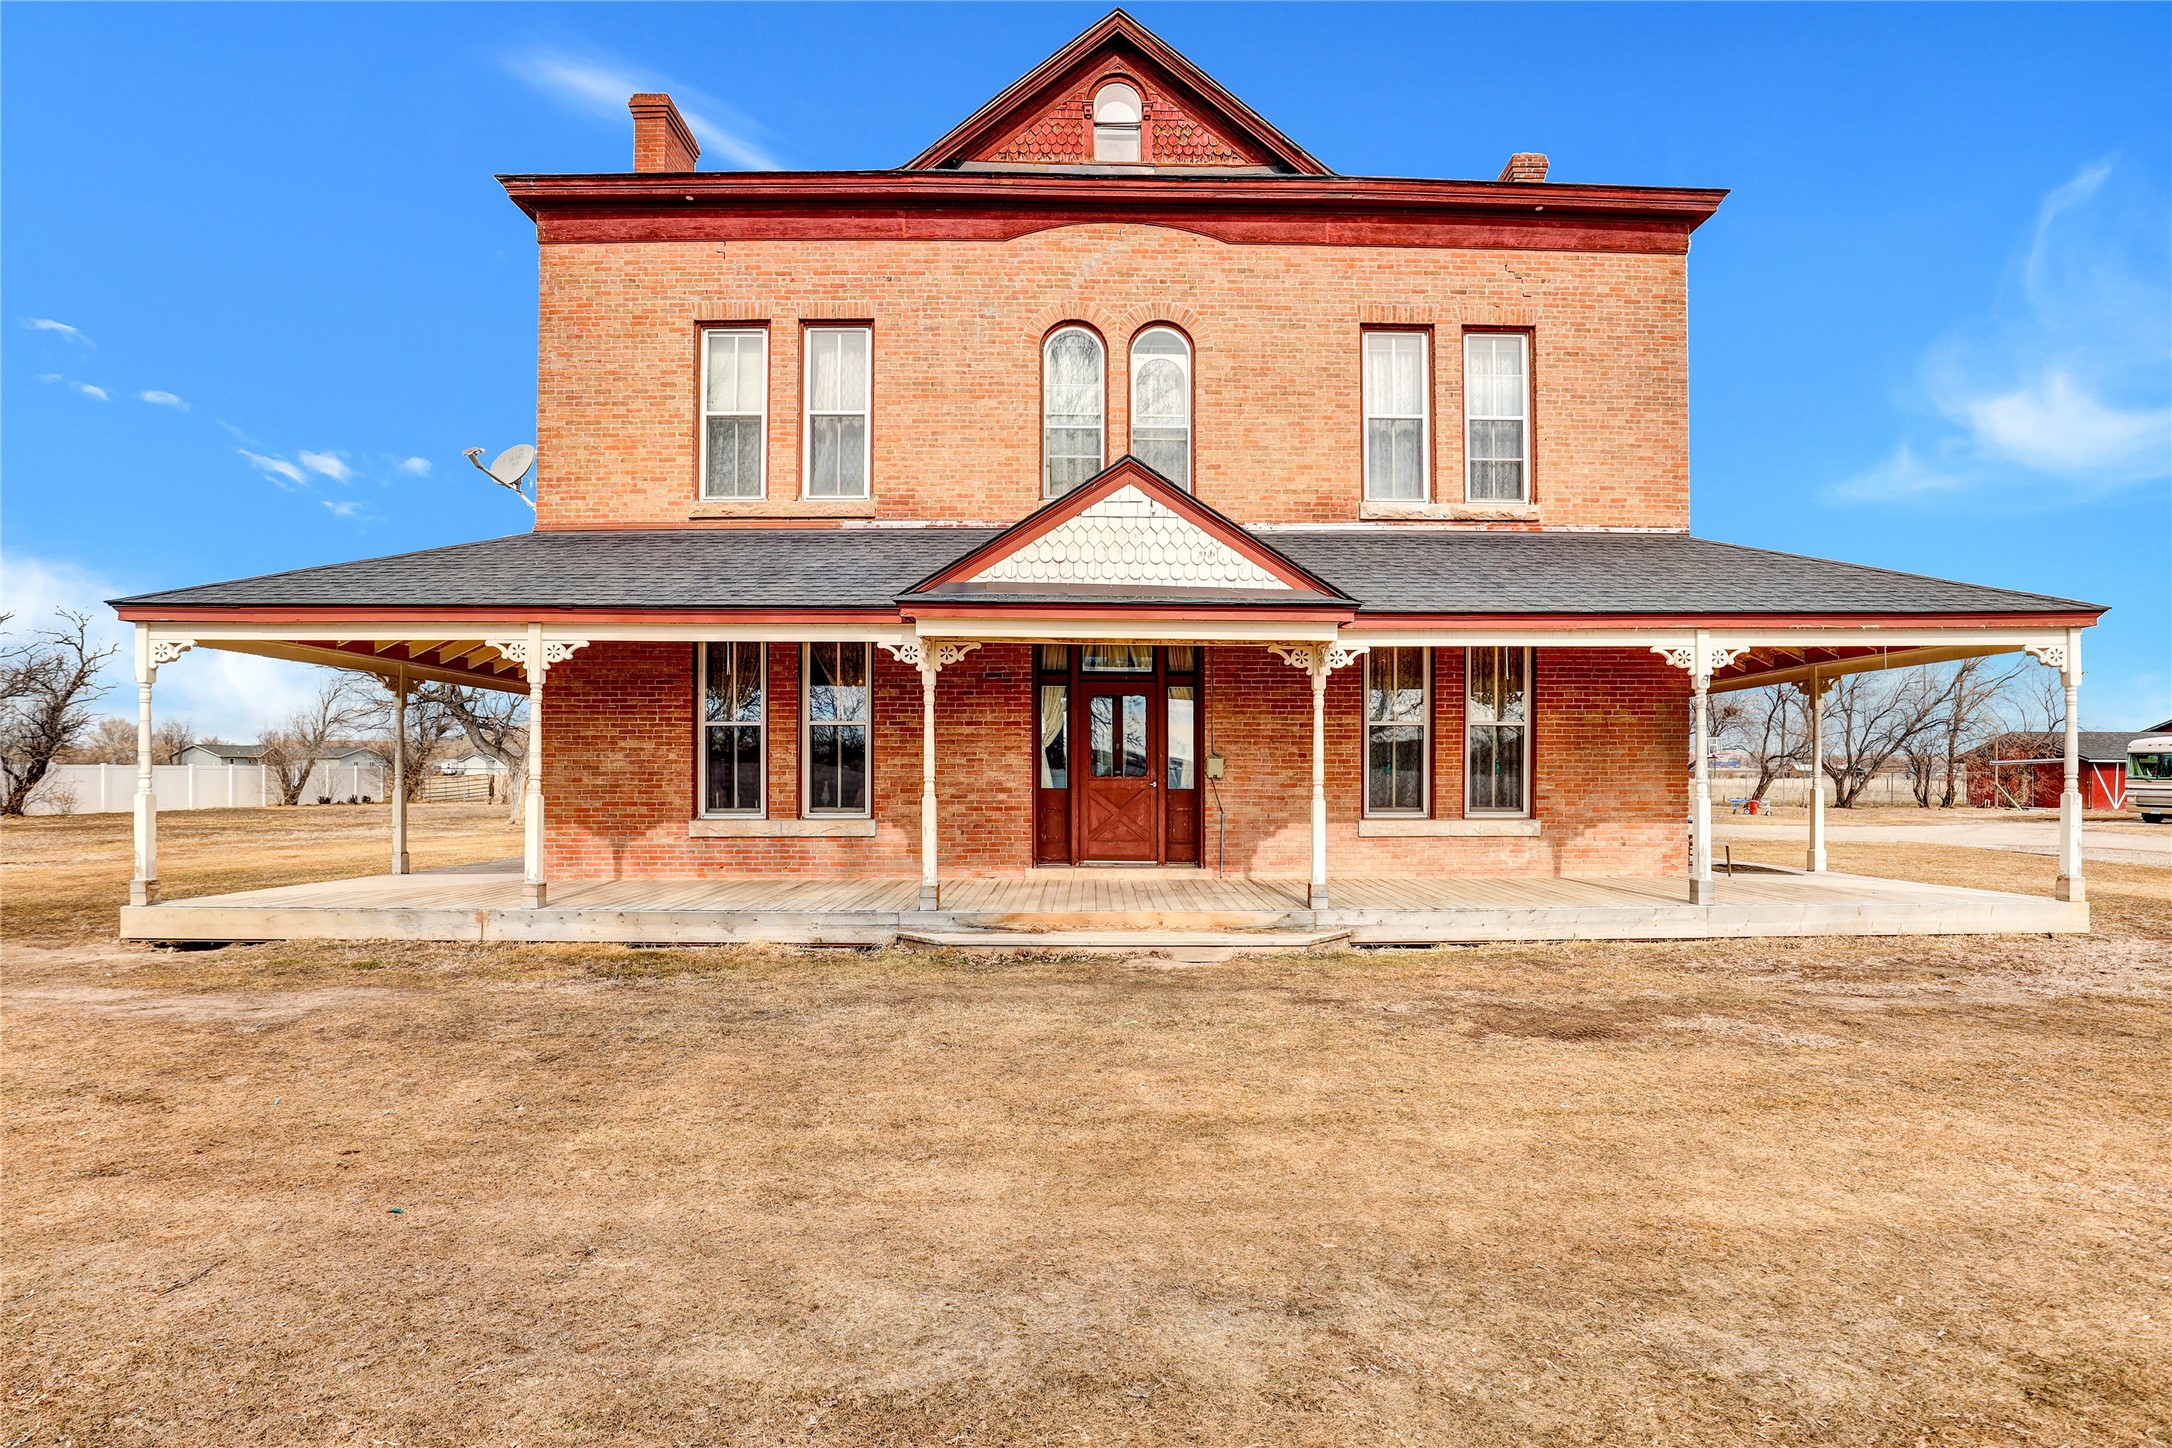 Just a few short minutes from Great Falls, this one-of a kind, 17-acre horse property is a rare find. The historic Vaughn Mansion w/ a winding staircase w/ a hand-carved banister, sculptured ceiling, 3 fireplaces, and the original sandstone brick homestead. The 4300 sq ft home has 12 rooms, including 4 beds, 1 1/2 baths, an updated kitchen with modern amenities, a library, a parlor, dining room, and an office. In the attic, you'll find an incredible playroom and access to the widows walk, where you can enjoy panoramic views of this incredible property. It doesn't stop there! The property boasts a creek, the original barn built in 1890 and lovely views of the Sun River. Recent updates include a new roof on the garage /shop, new horse shelter and shed newer furnace, new hydrants in the pastures. Imagine the possibilities this property has to offer. Whether you're looking for a place to call home, a bed and breakfast, or an urban hobby farm, this is the property you've been waiting for.